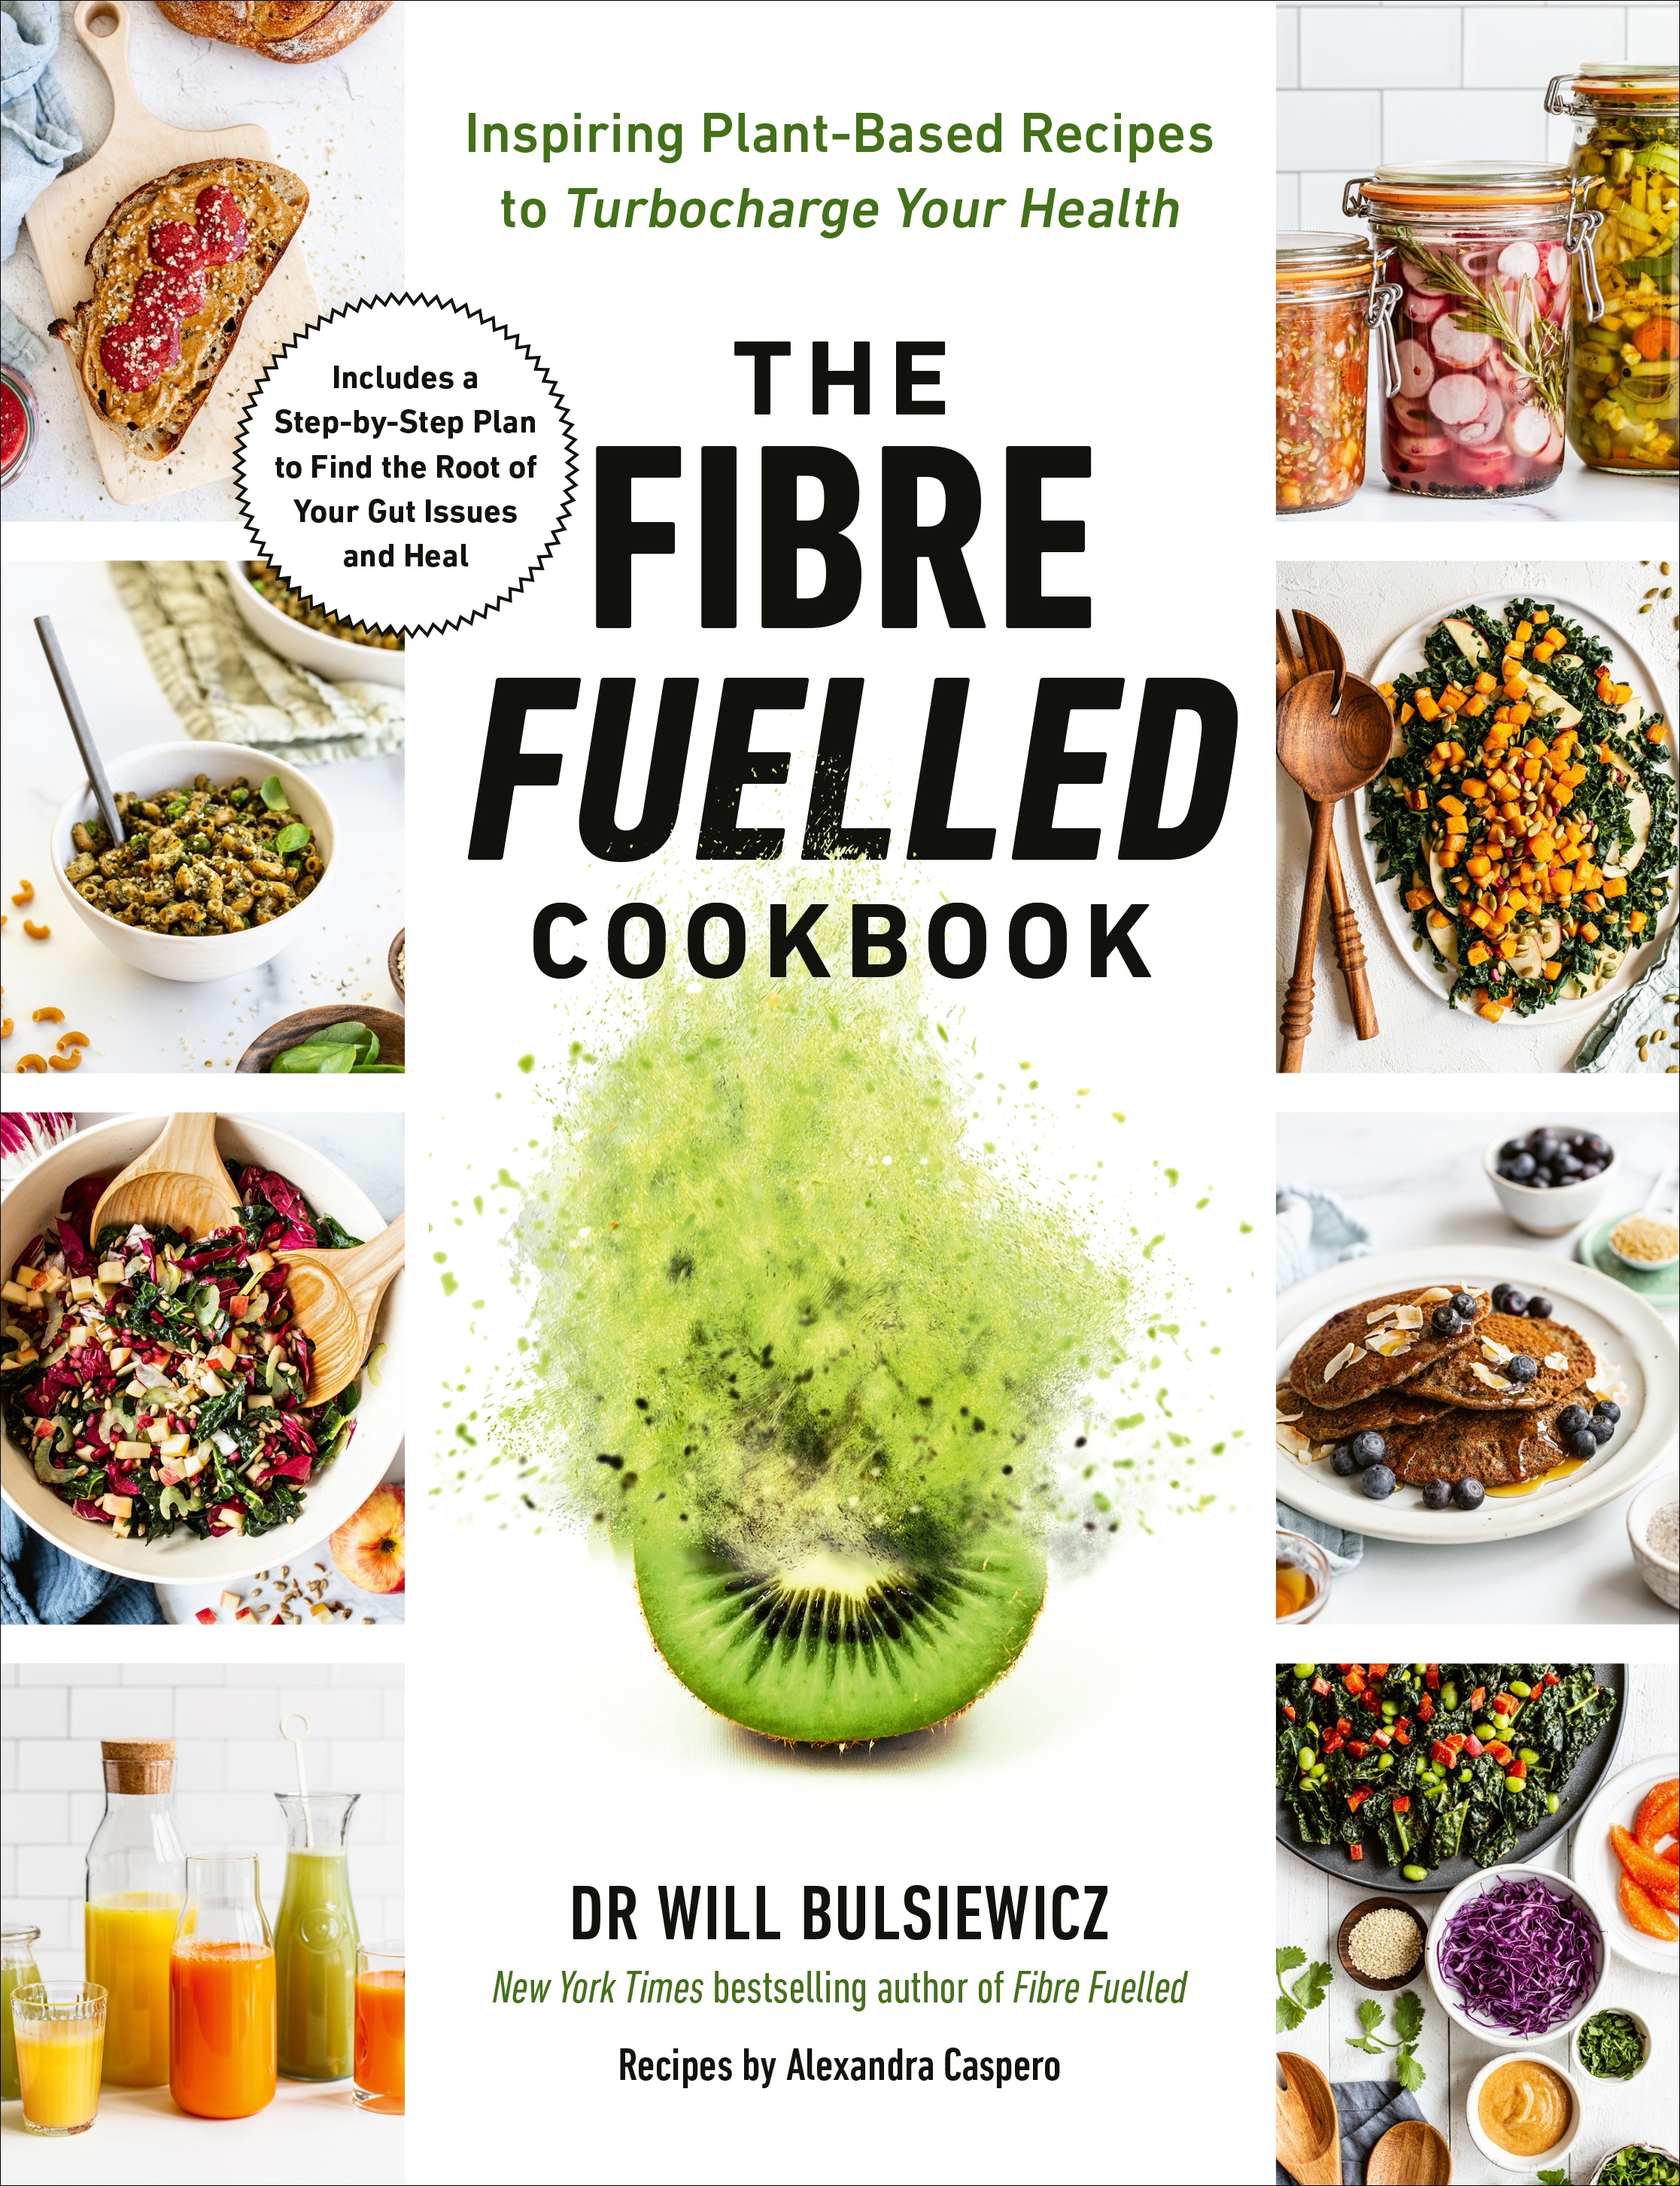 Book “The Fibre Fuelled Cookbook” by Will Bulsiewicz — May 19, 2022